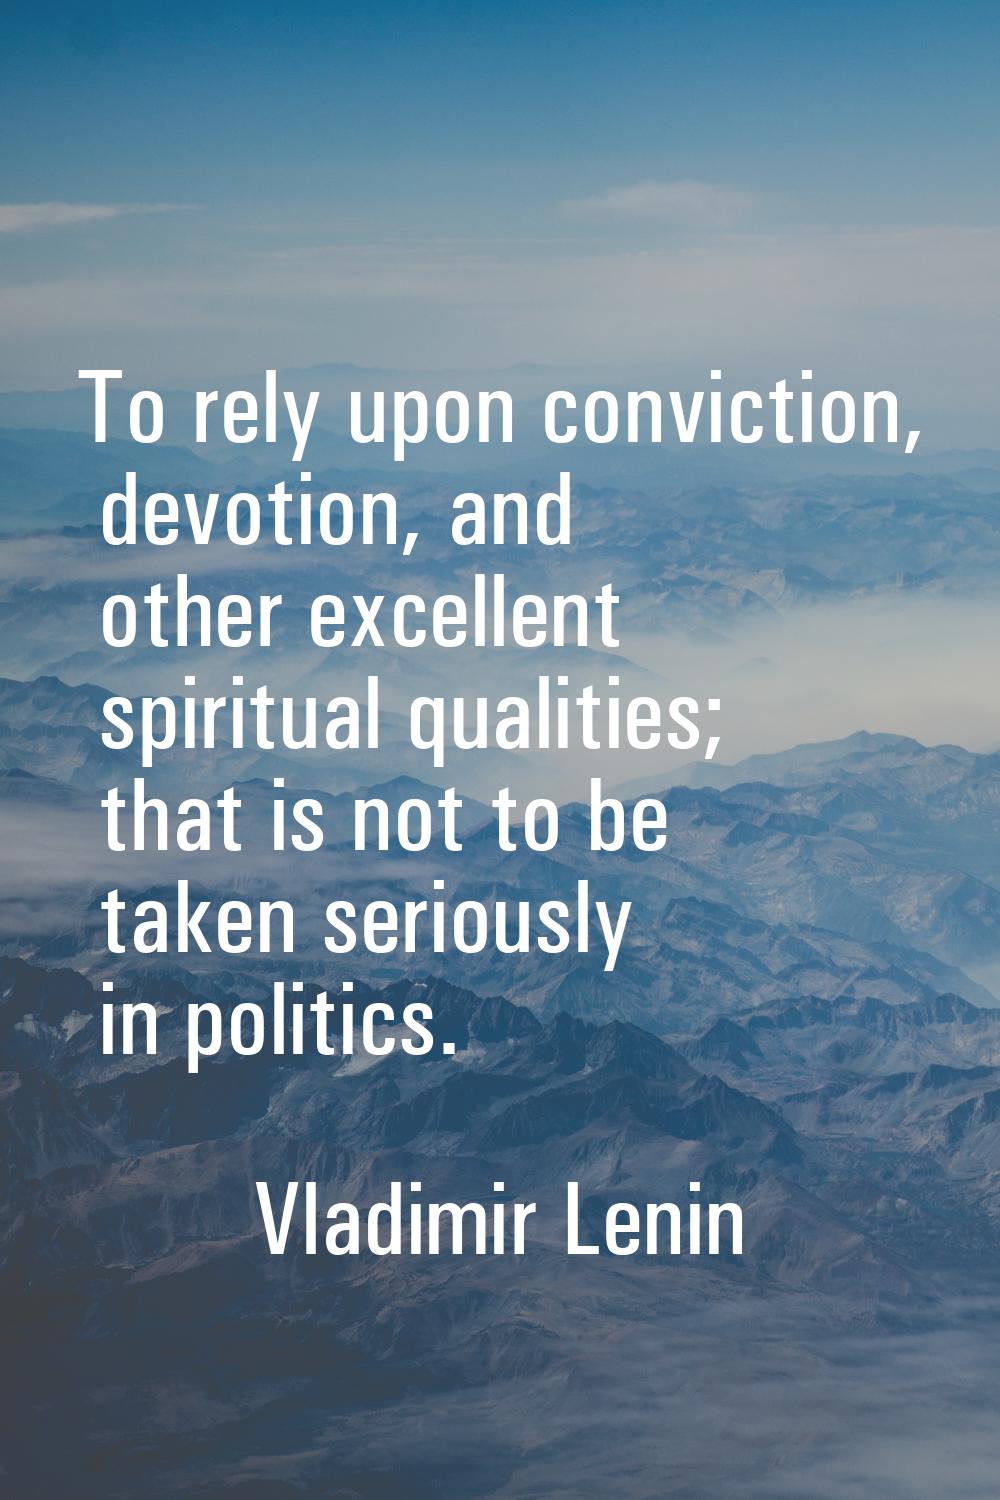 To rely upon conviction, devotion, and other excellent spiritual qualities; that is not to be taken